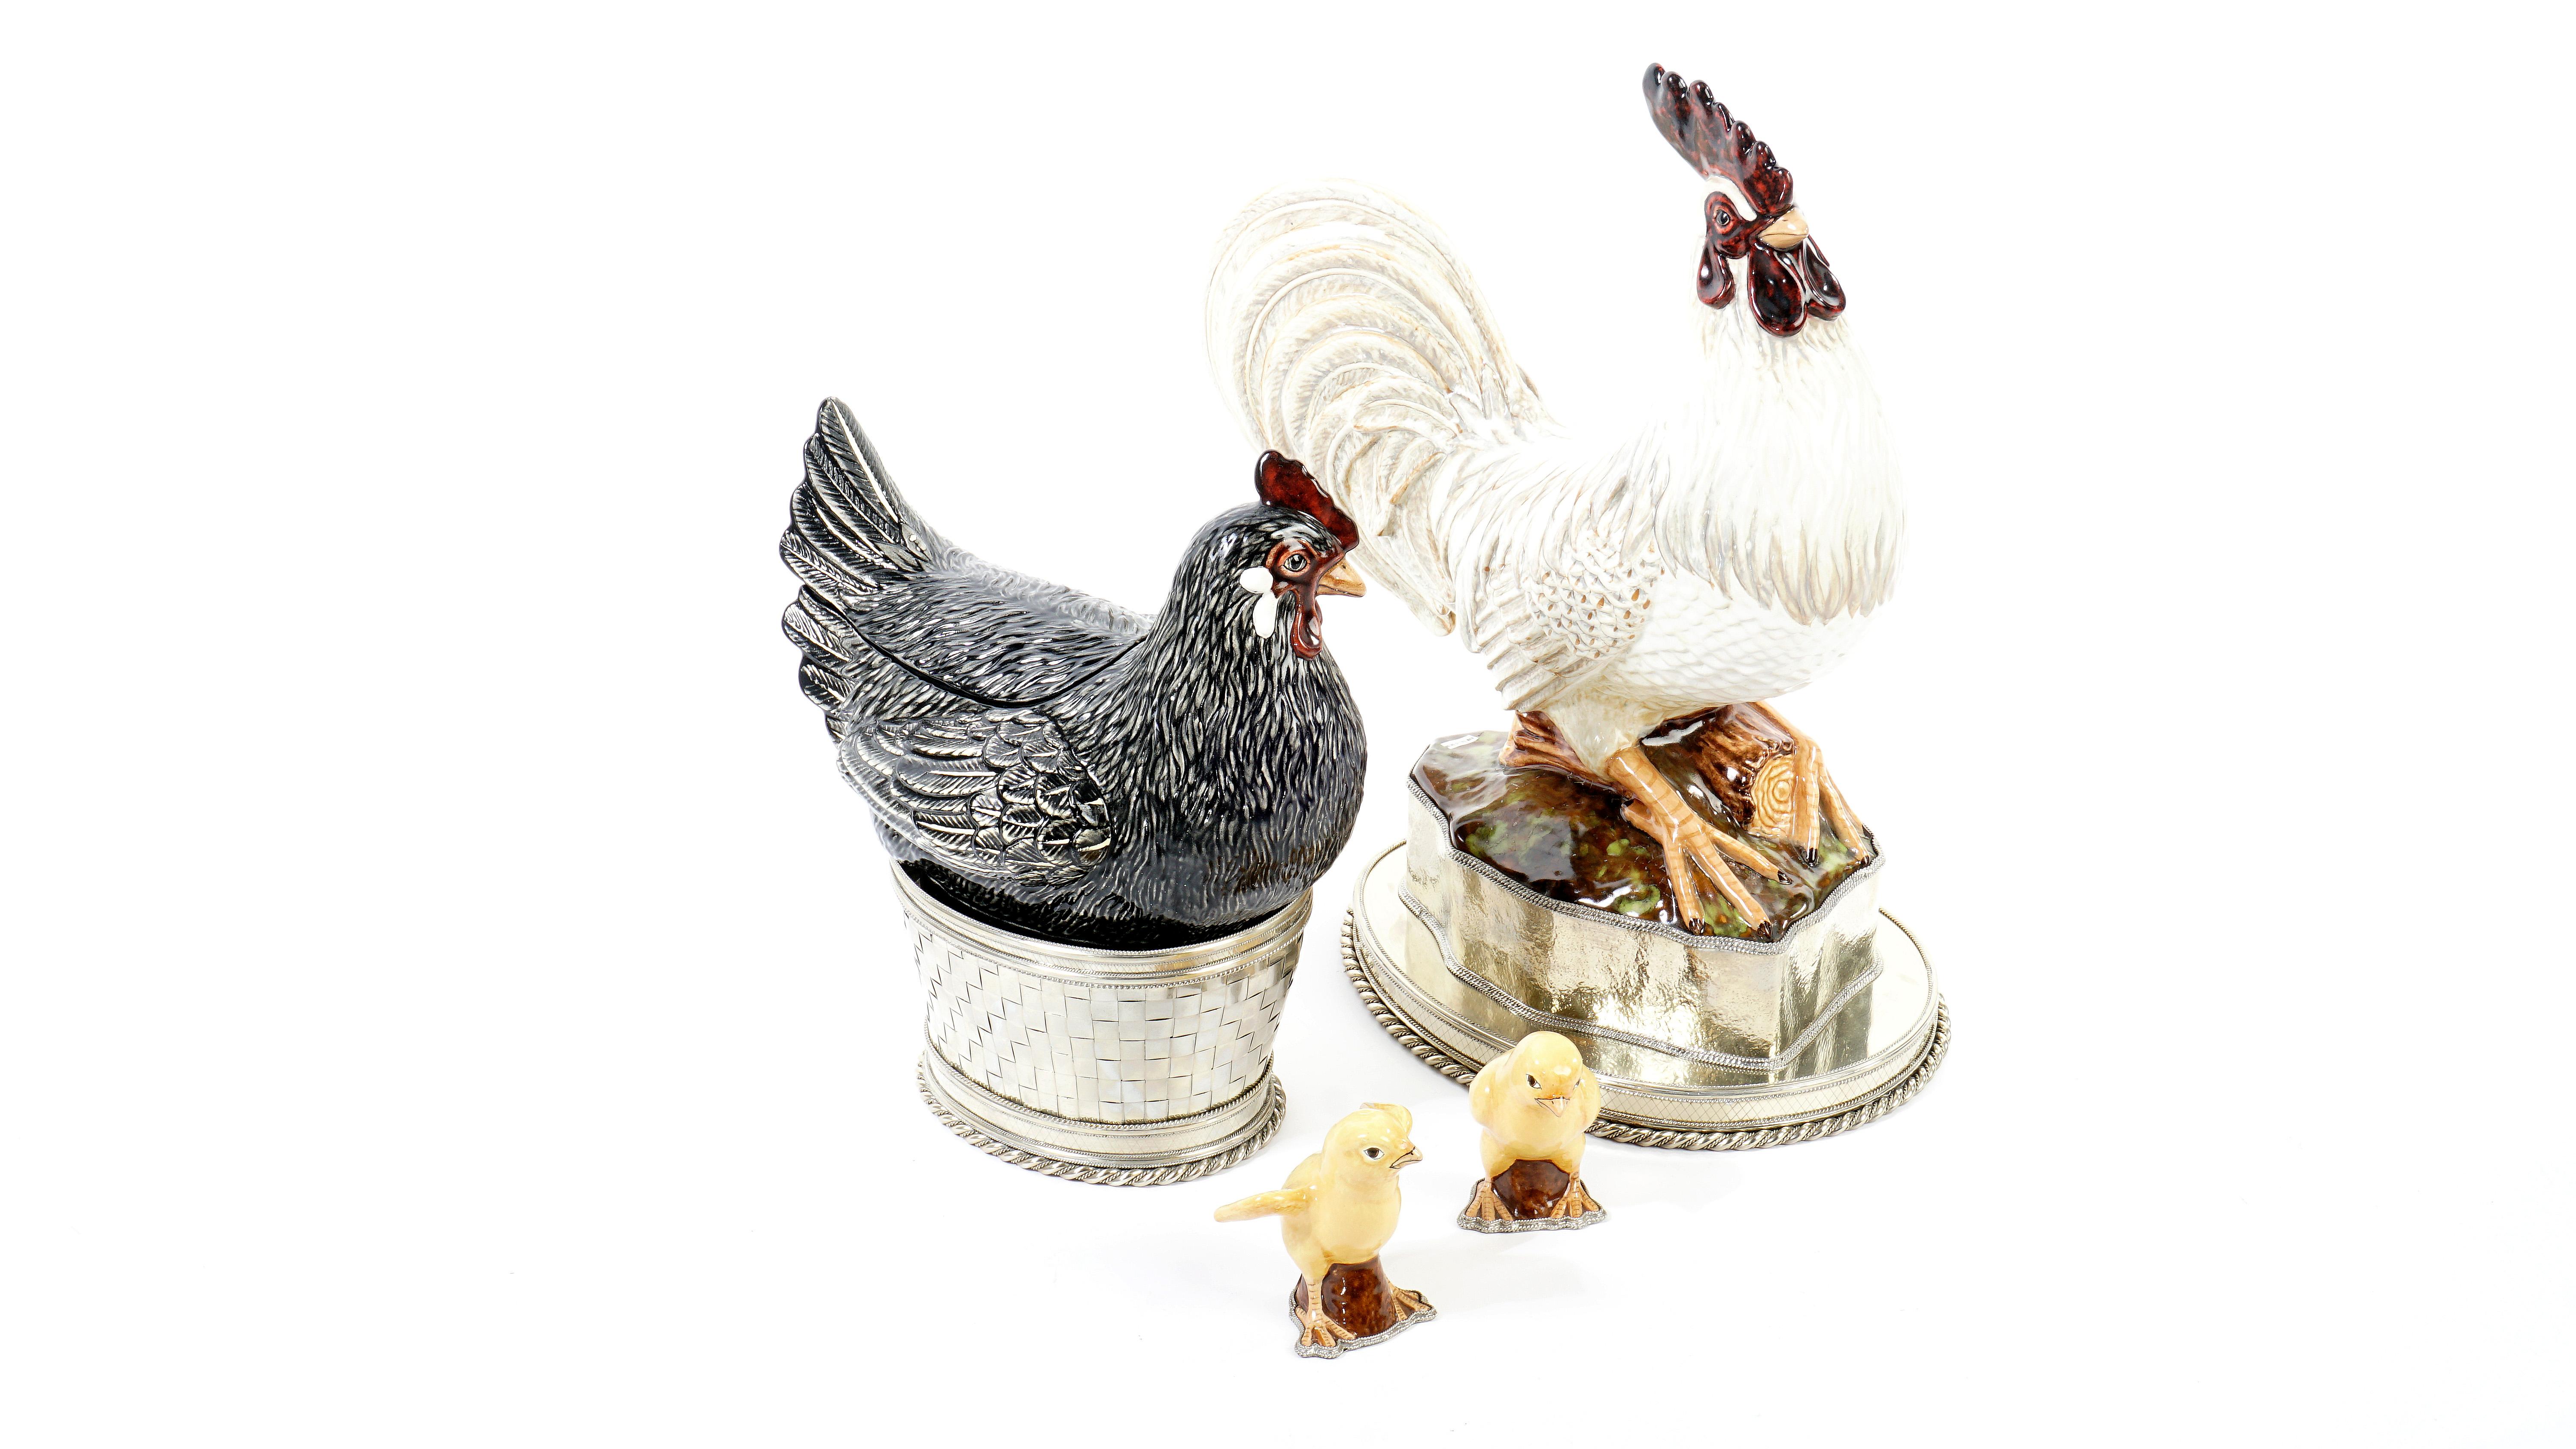 Chicken, Rooster and Chicks, Ceramic and White Metal 'Alpaca' 2